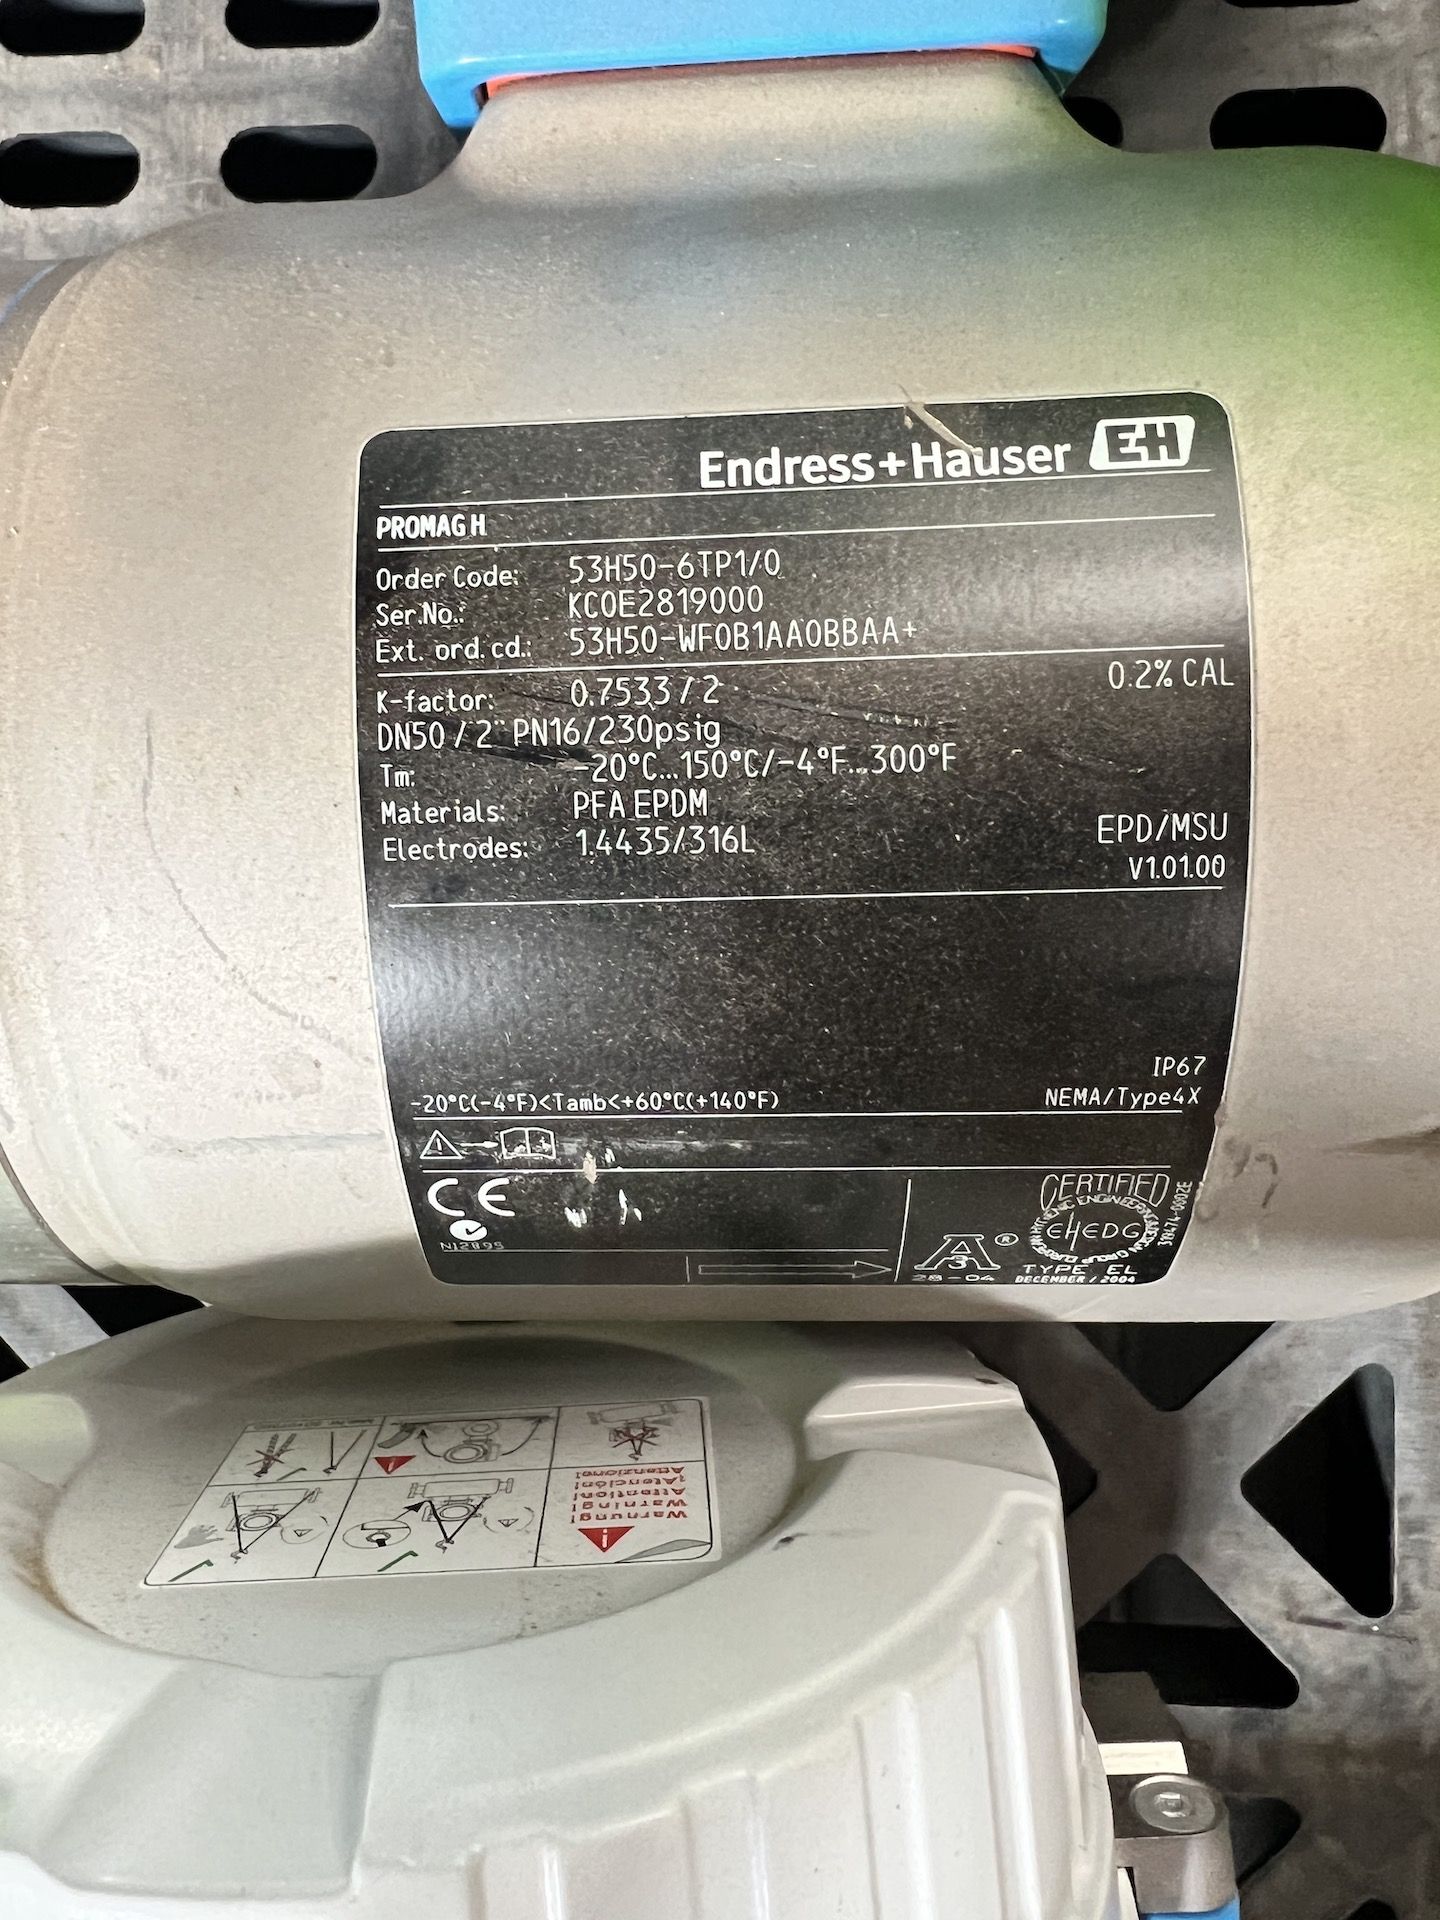 ENDRESS HAUSER FLOW METER, MODEL PROMAG H (BELIEVED TO BE NEW) - Image 3 of 6